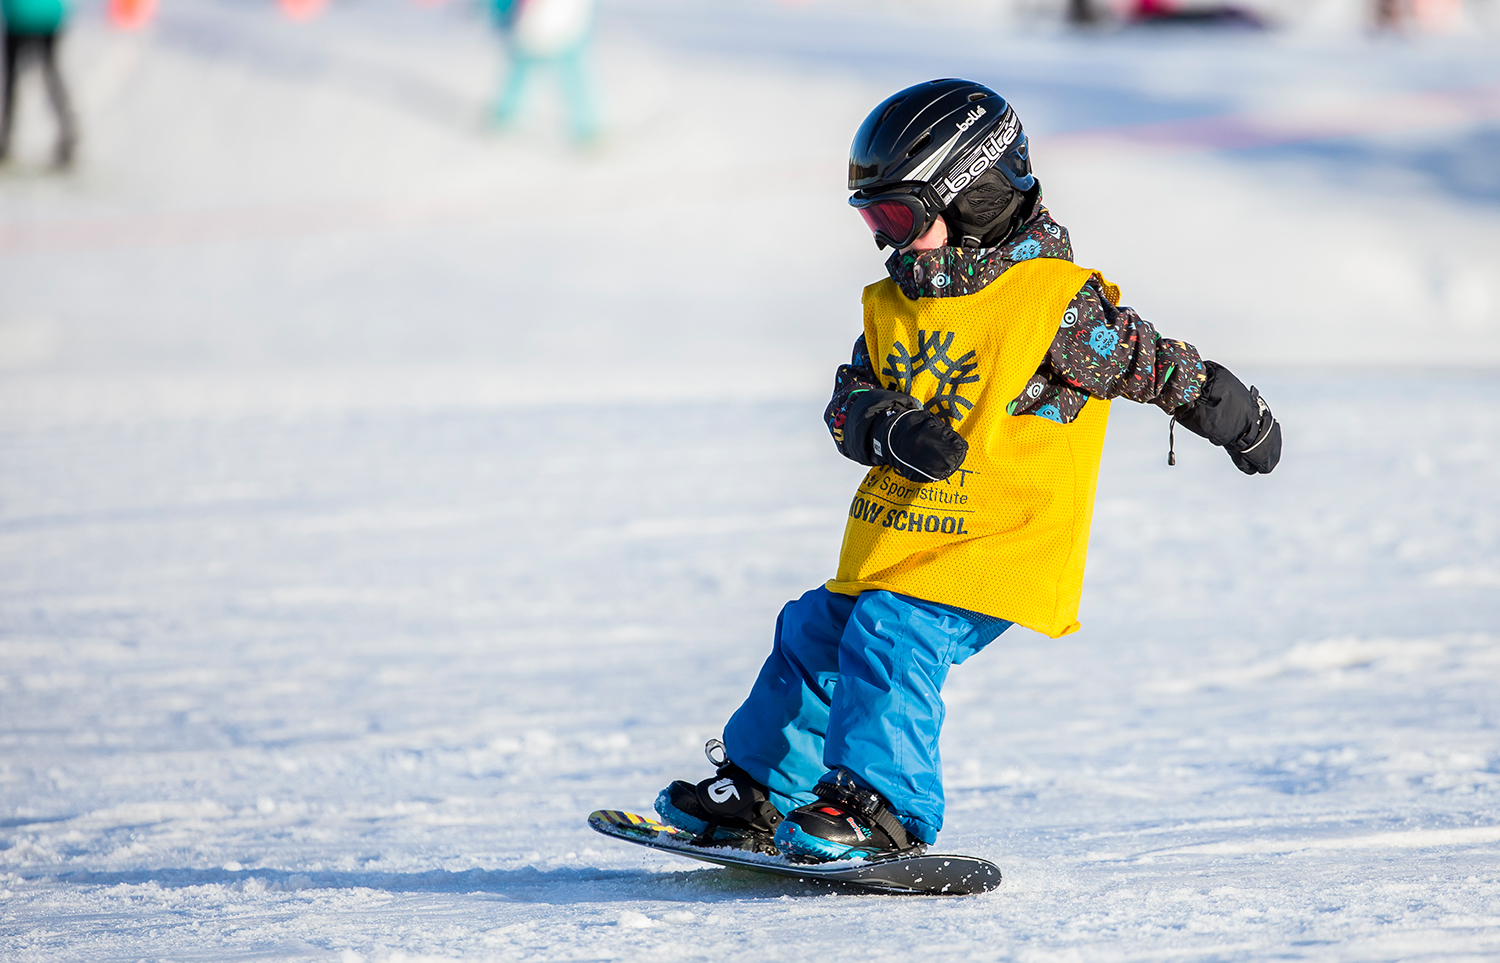 Tips for getting your child into snowboarding, from WinSport & Burton